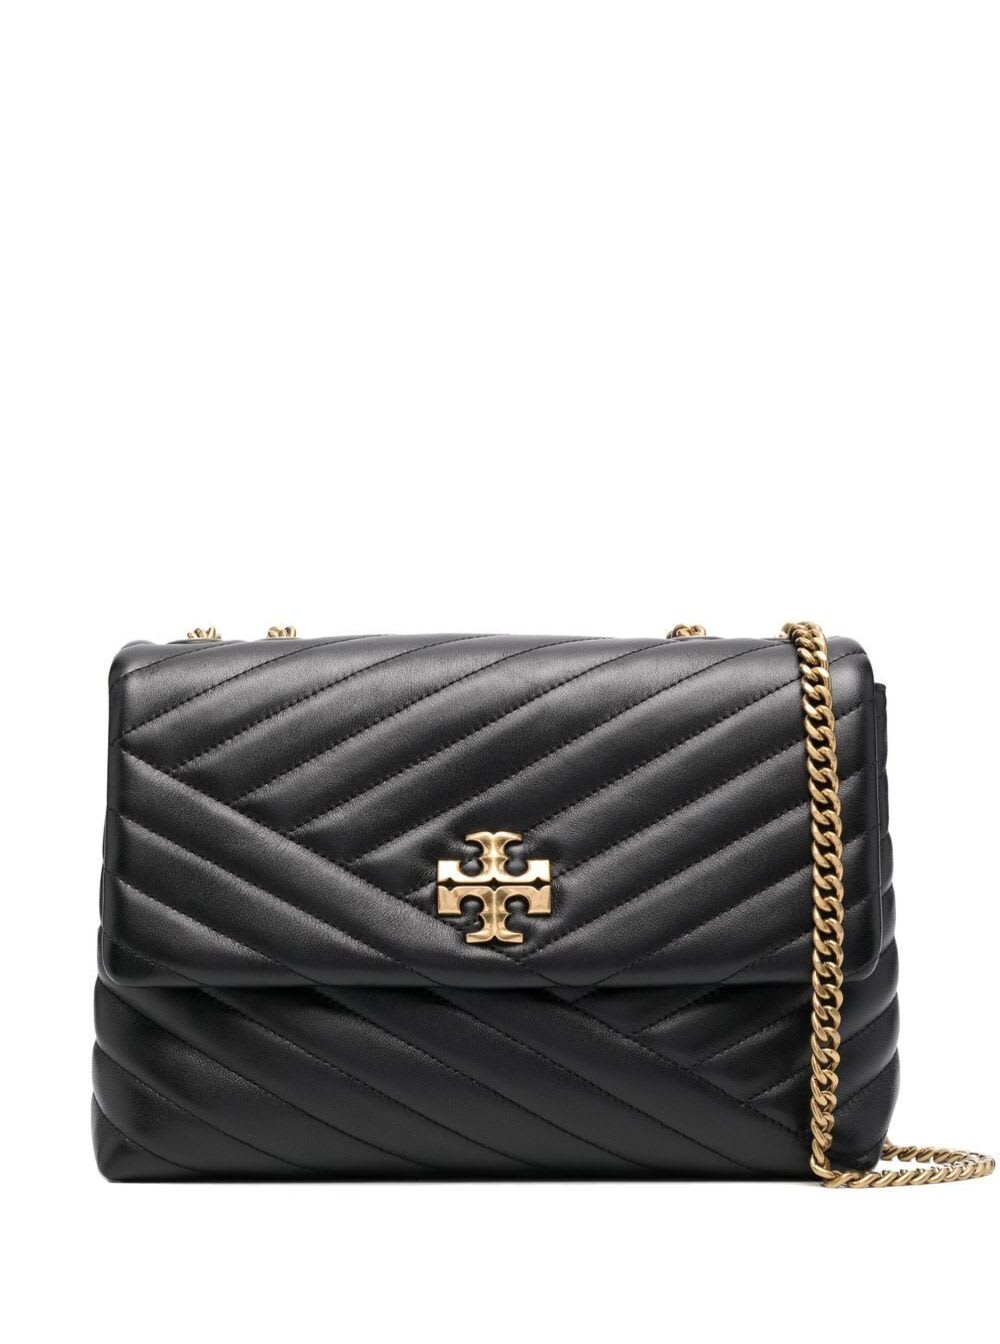 TORY BURCH CONVERTIBLE KIRA BLACK SHOULDER BAG WITH LOGO IN CHEVRON-QUILTED LEATHER WOMAN